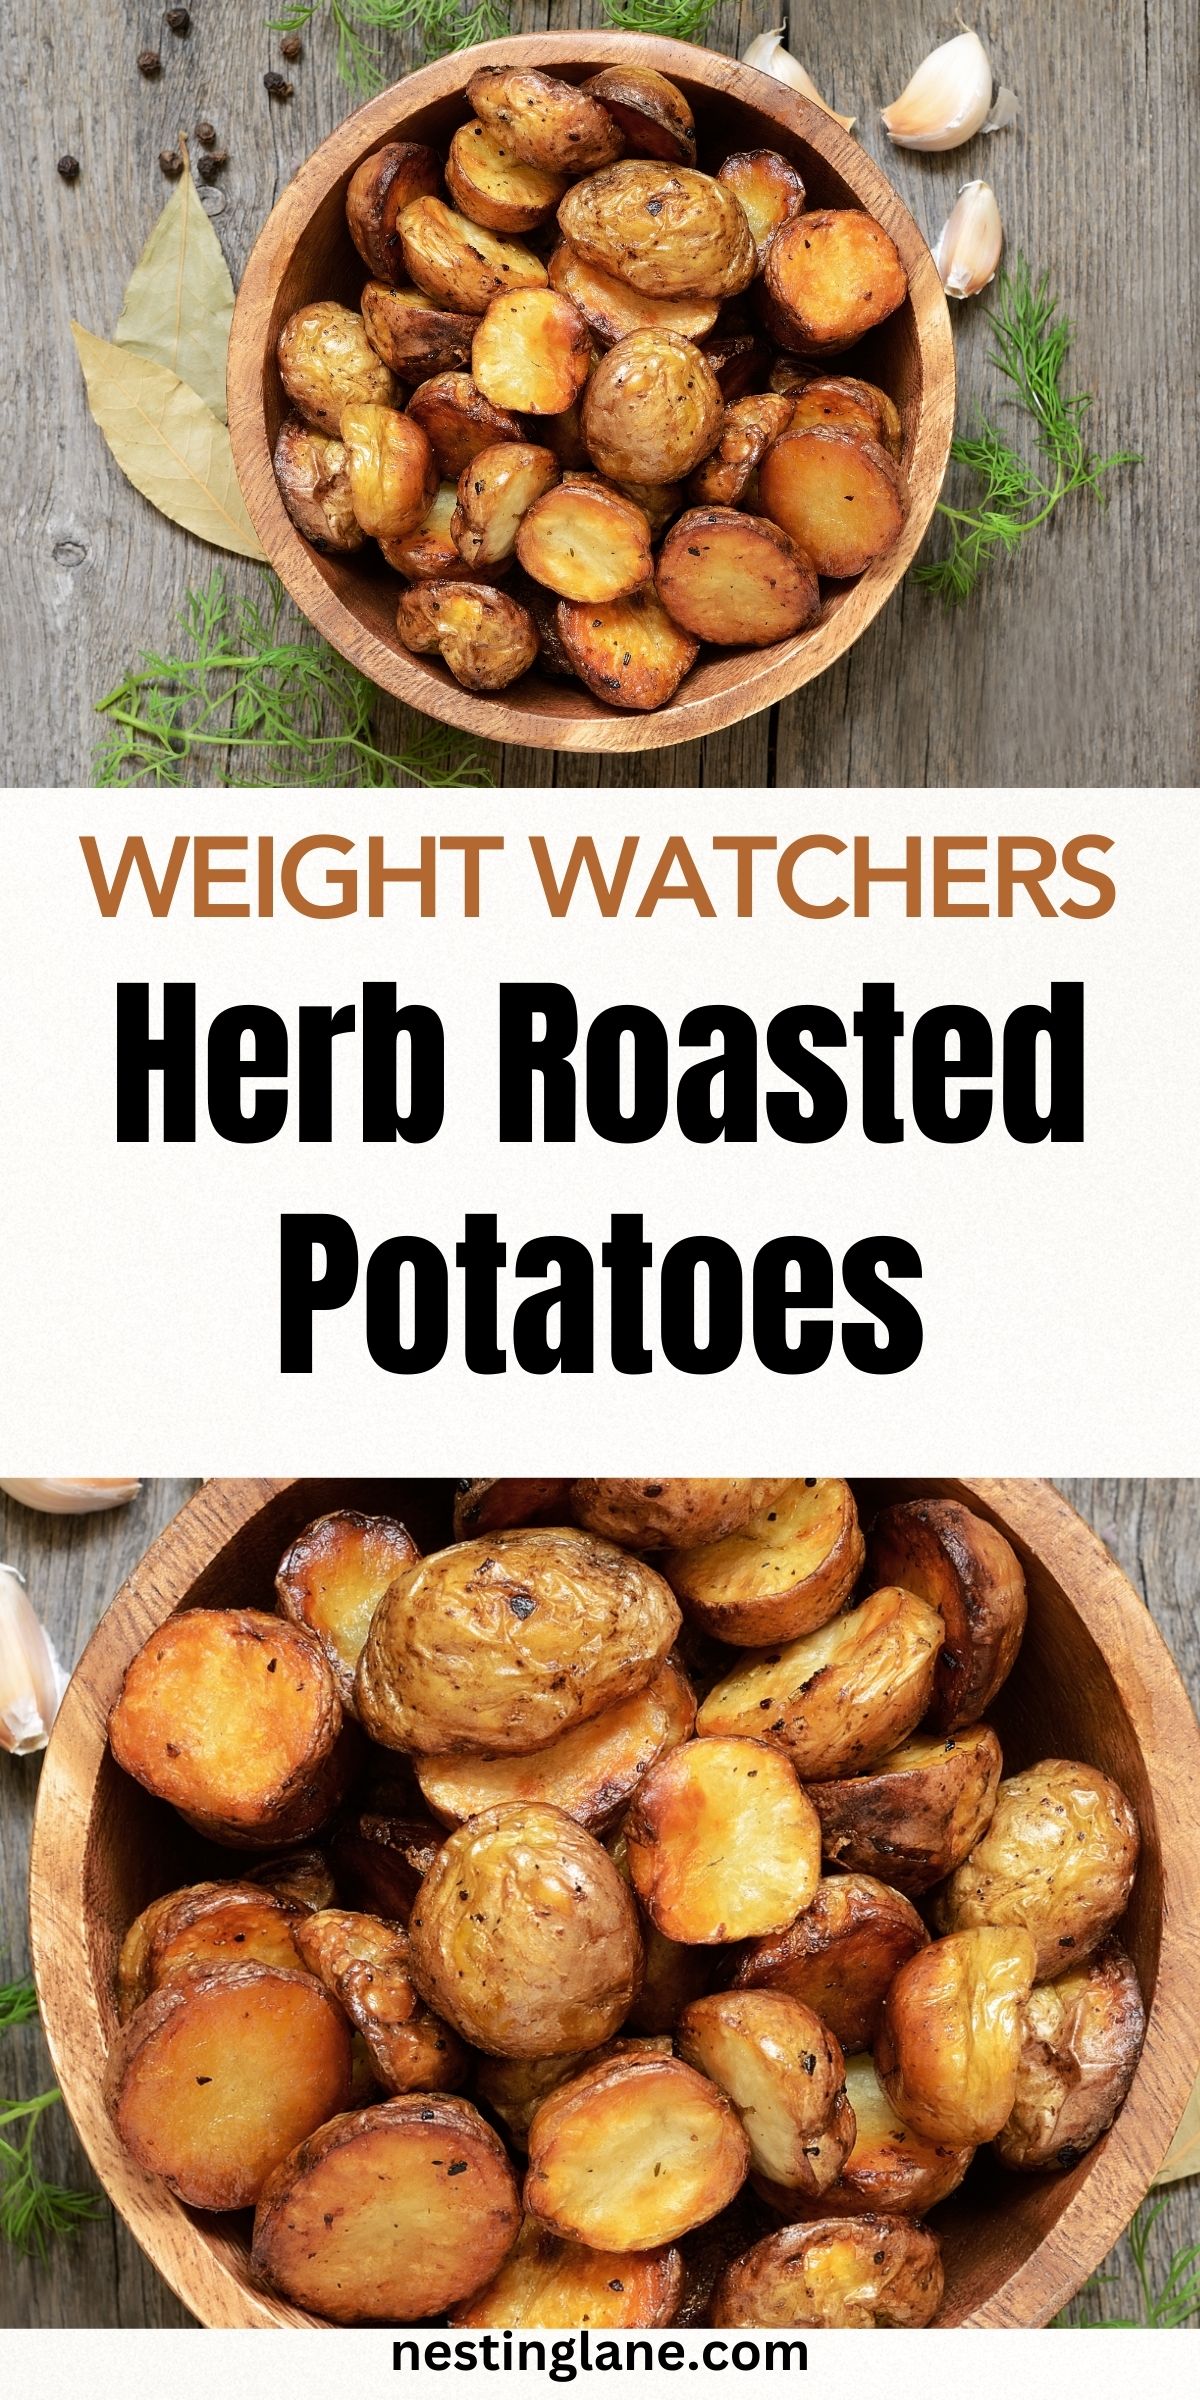 Weight Watchers Herb Roasted Potatoes Recipe Graphic.